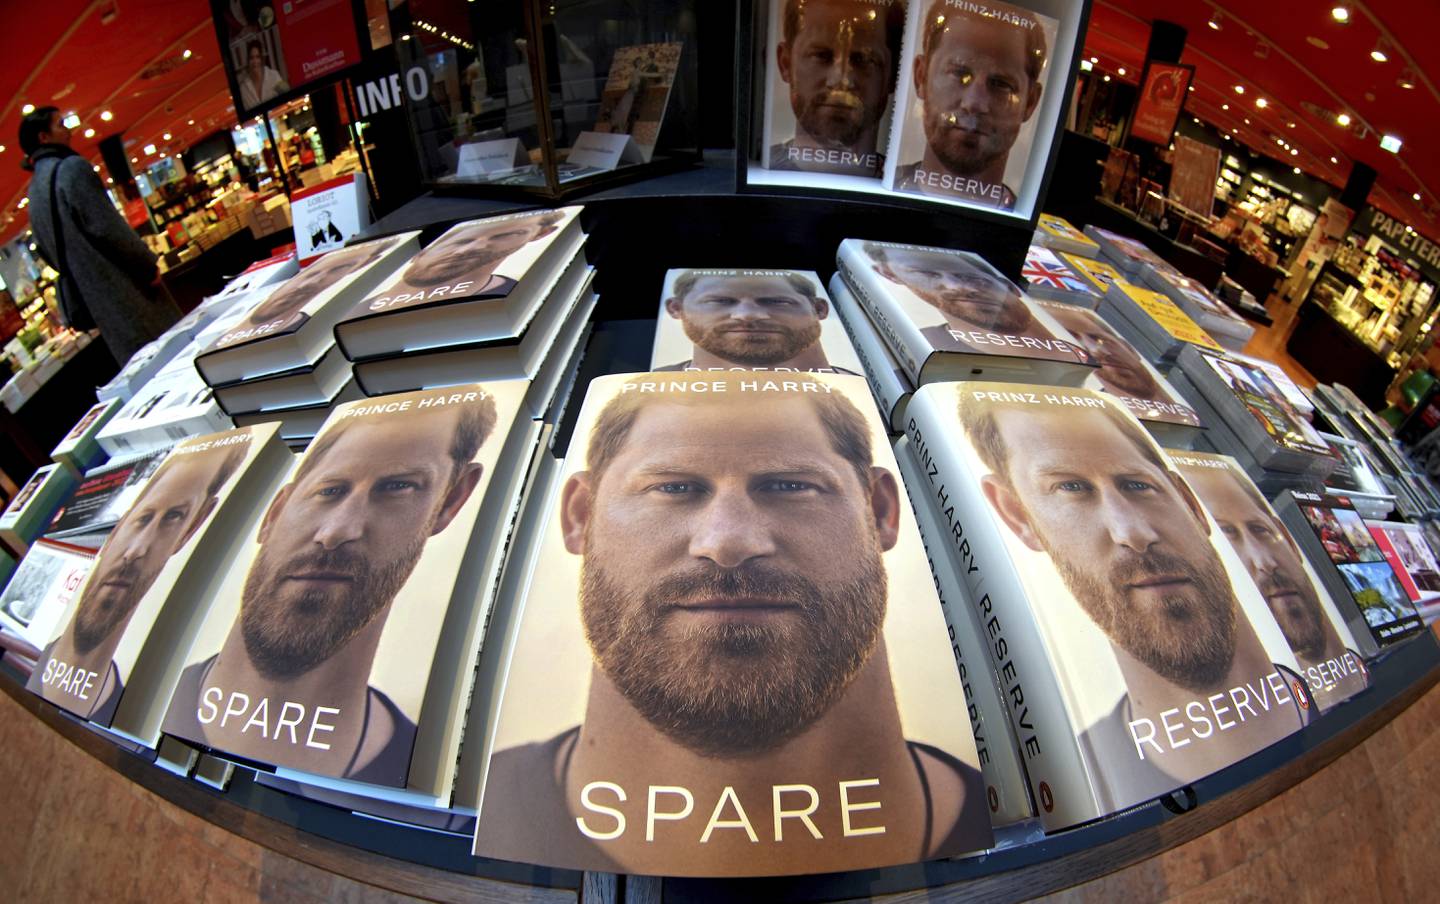 Copies of Spare at a book store in Berlin, Germany which went on sale last week. AP
